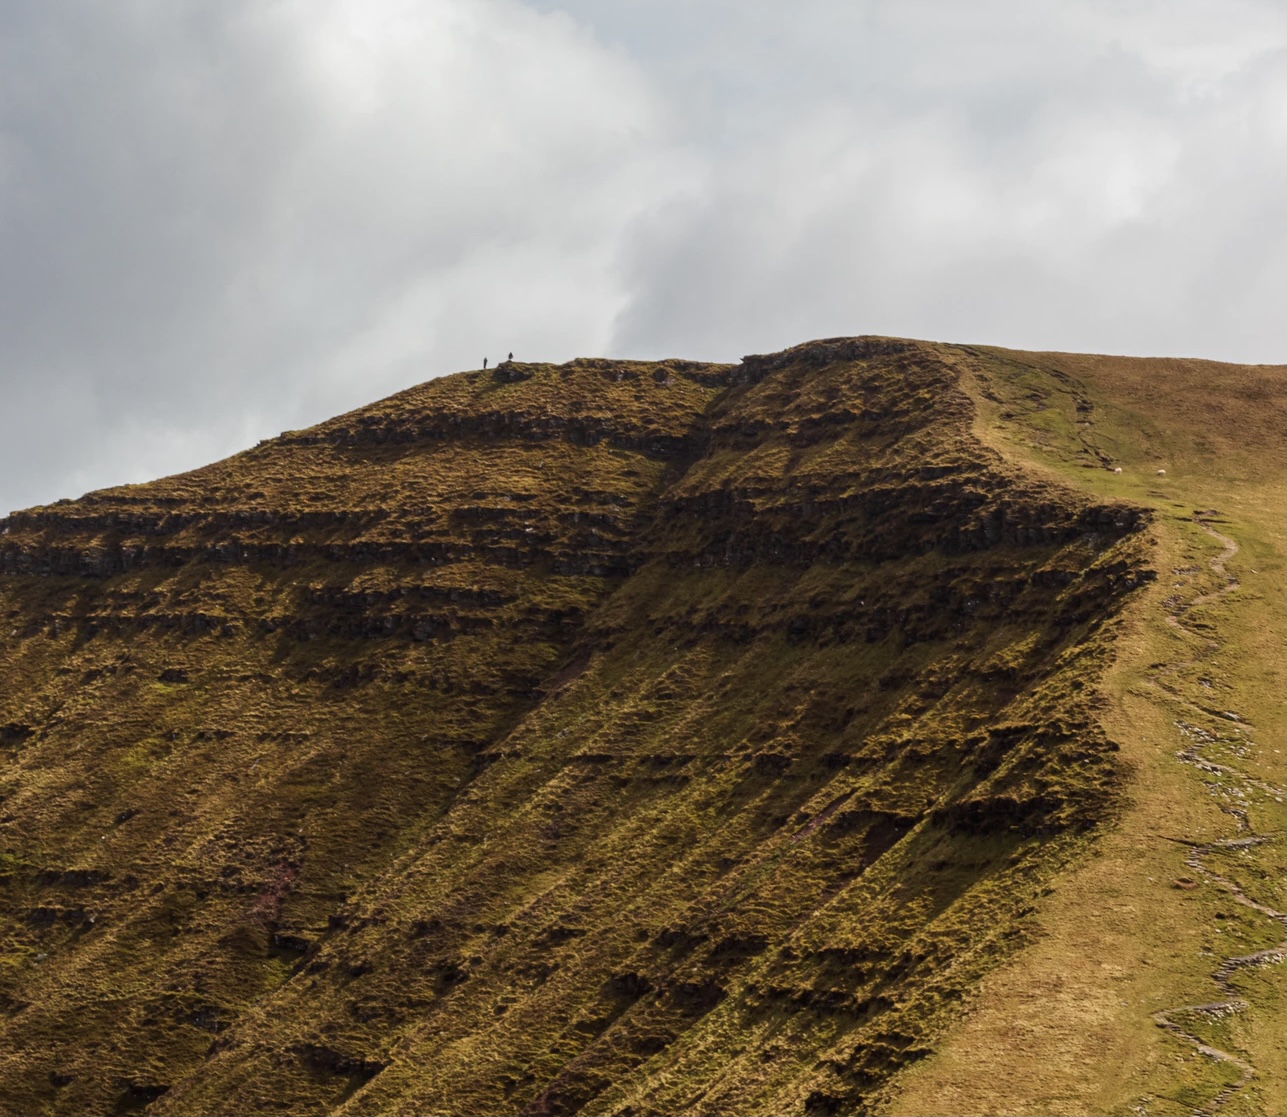 NEWS | You could soon have to pay £7.50 to park your vehicle and climb Pen y Fan in the Brecon Beacons